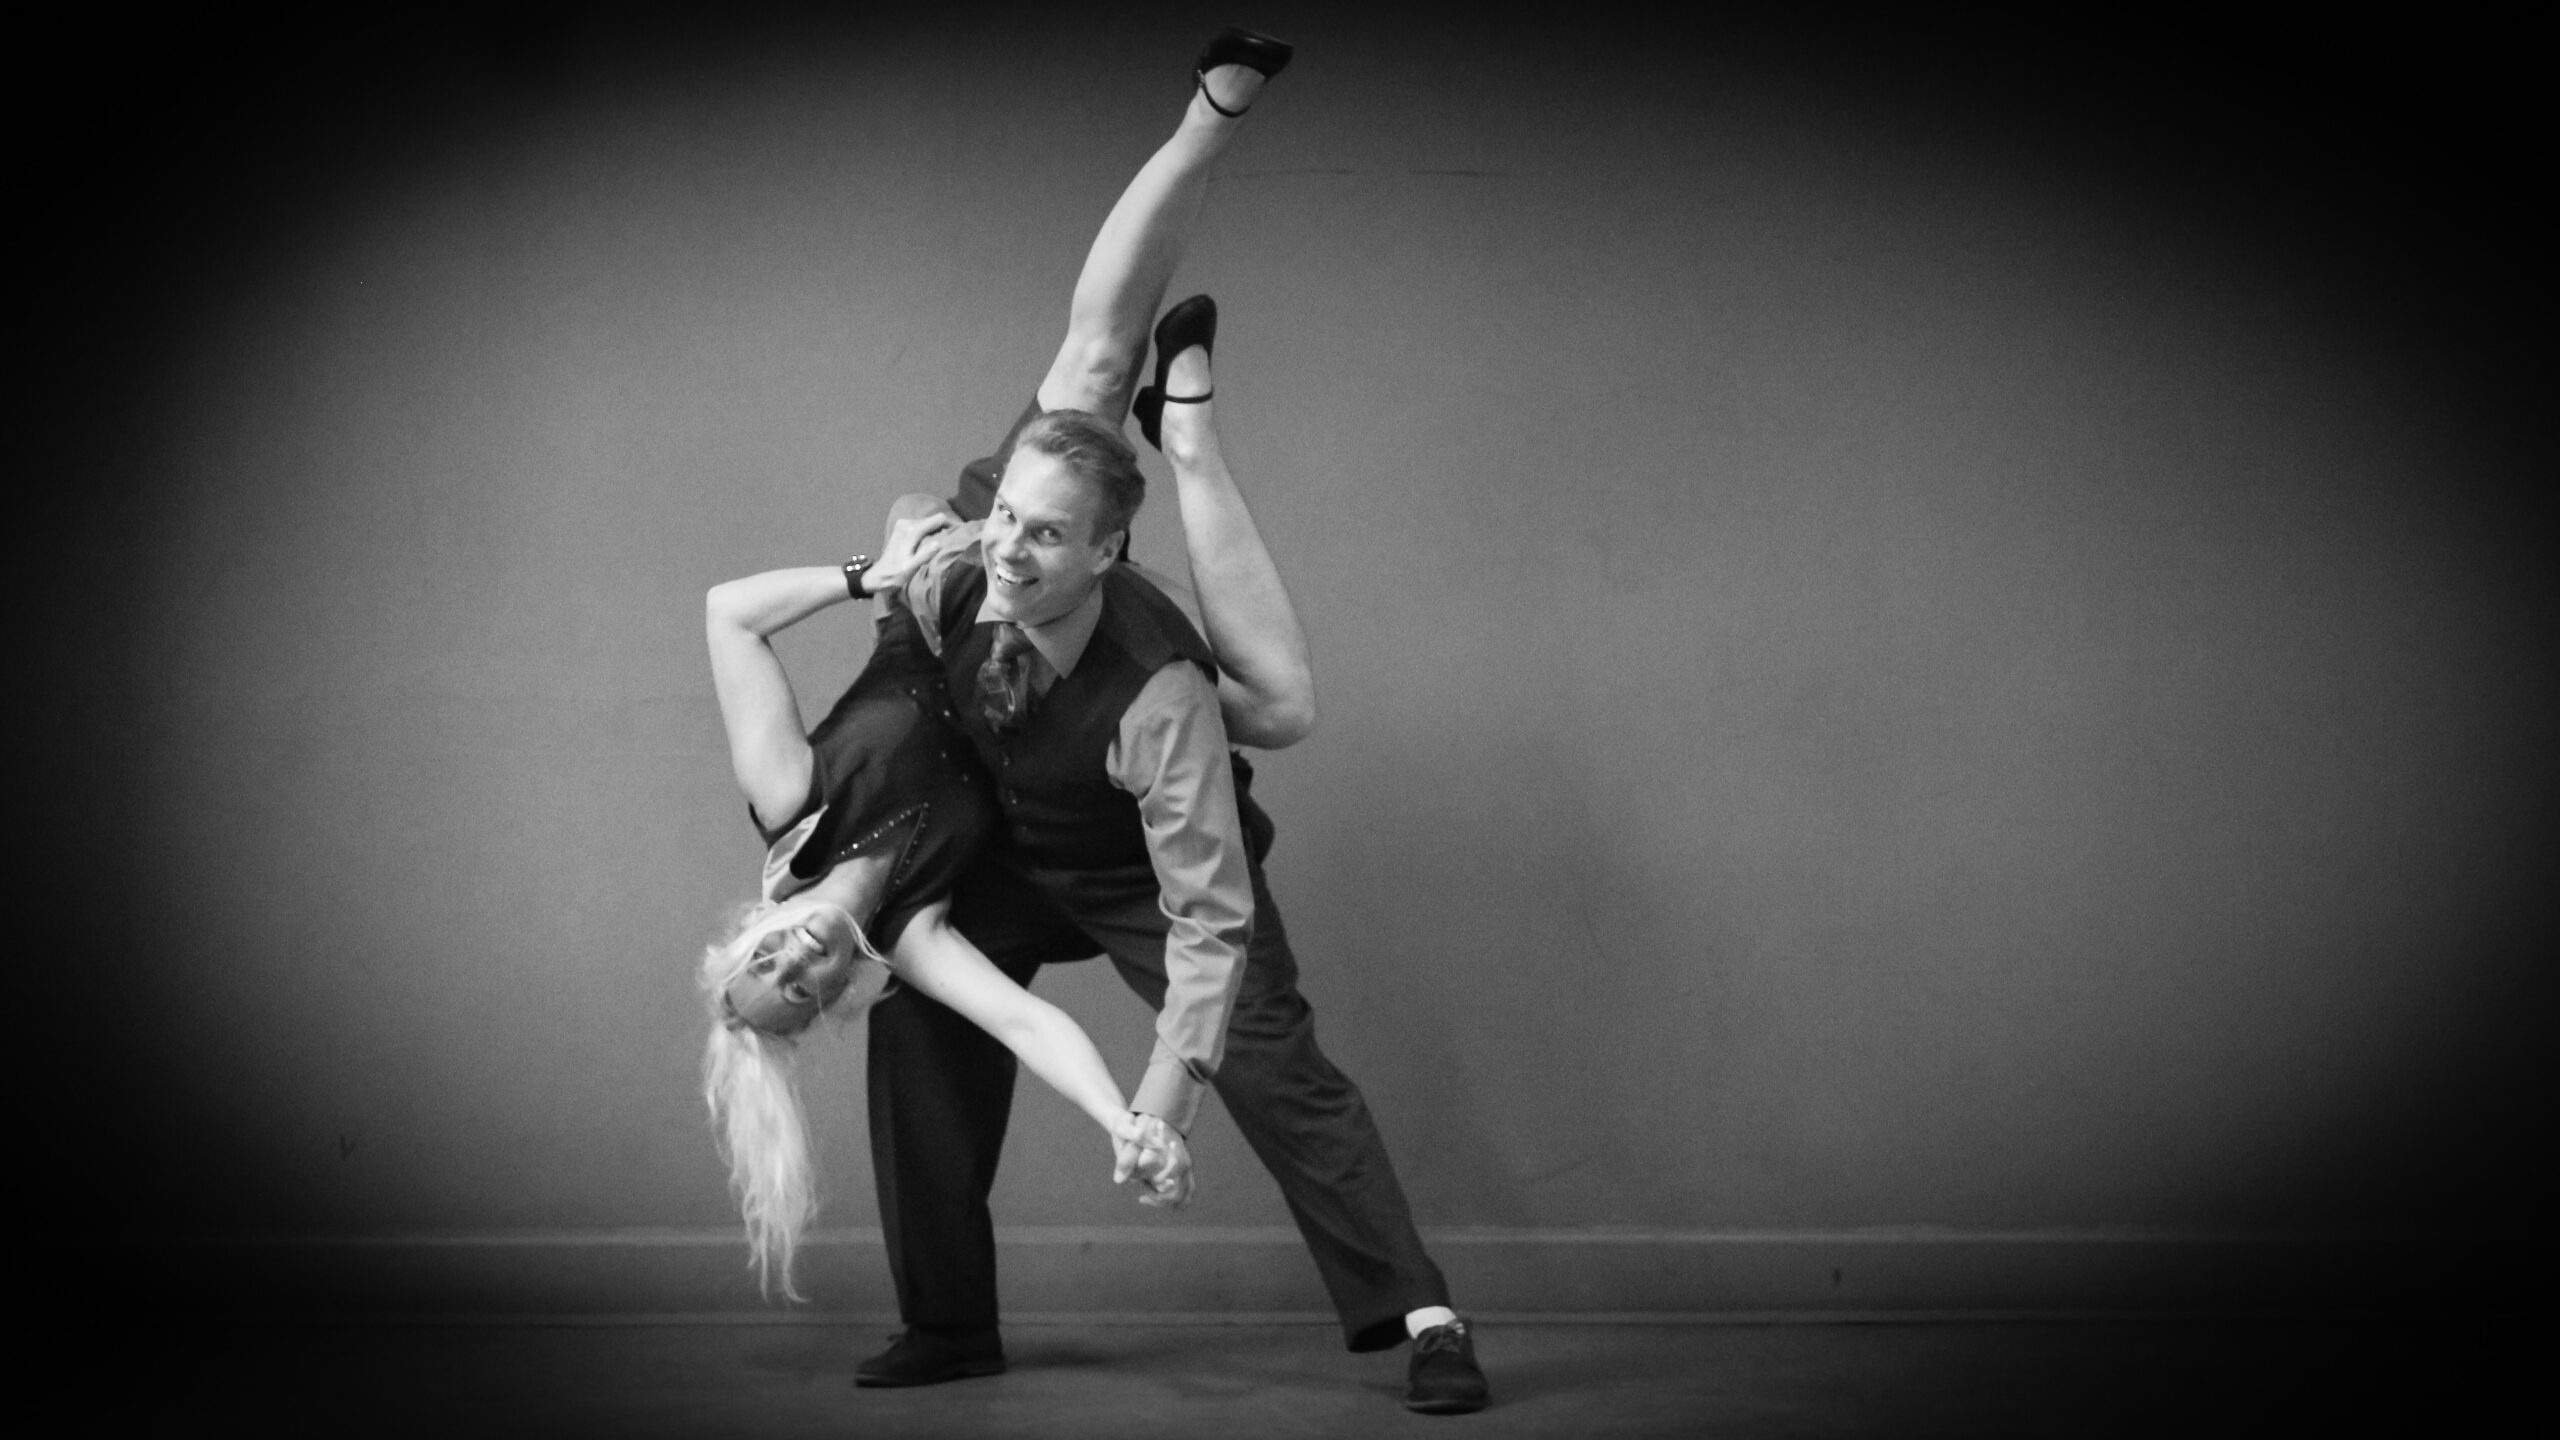 Swing Dance: Kenny Nelson, Acrobatic Rock'n'Roll Moves, Competitive Form Of Partner Dance, Charleston, Black and White. 2560x1440 HD Wallpaper.